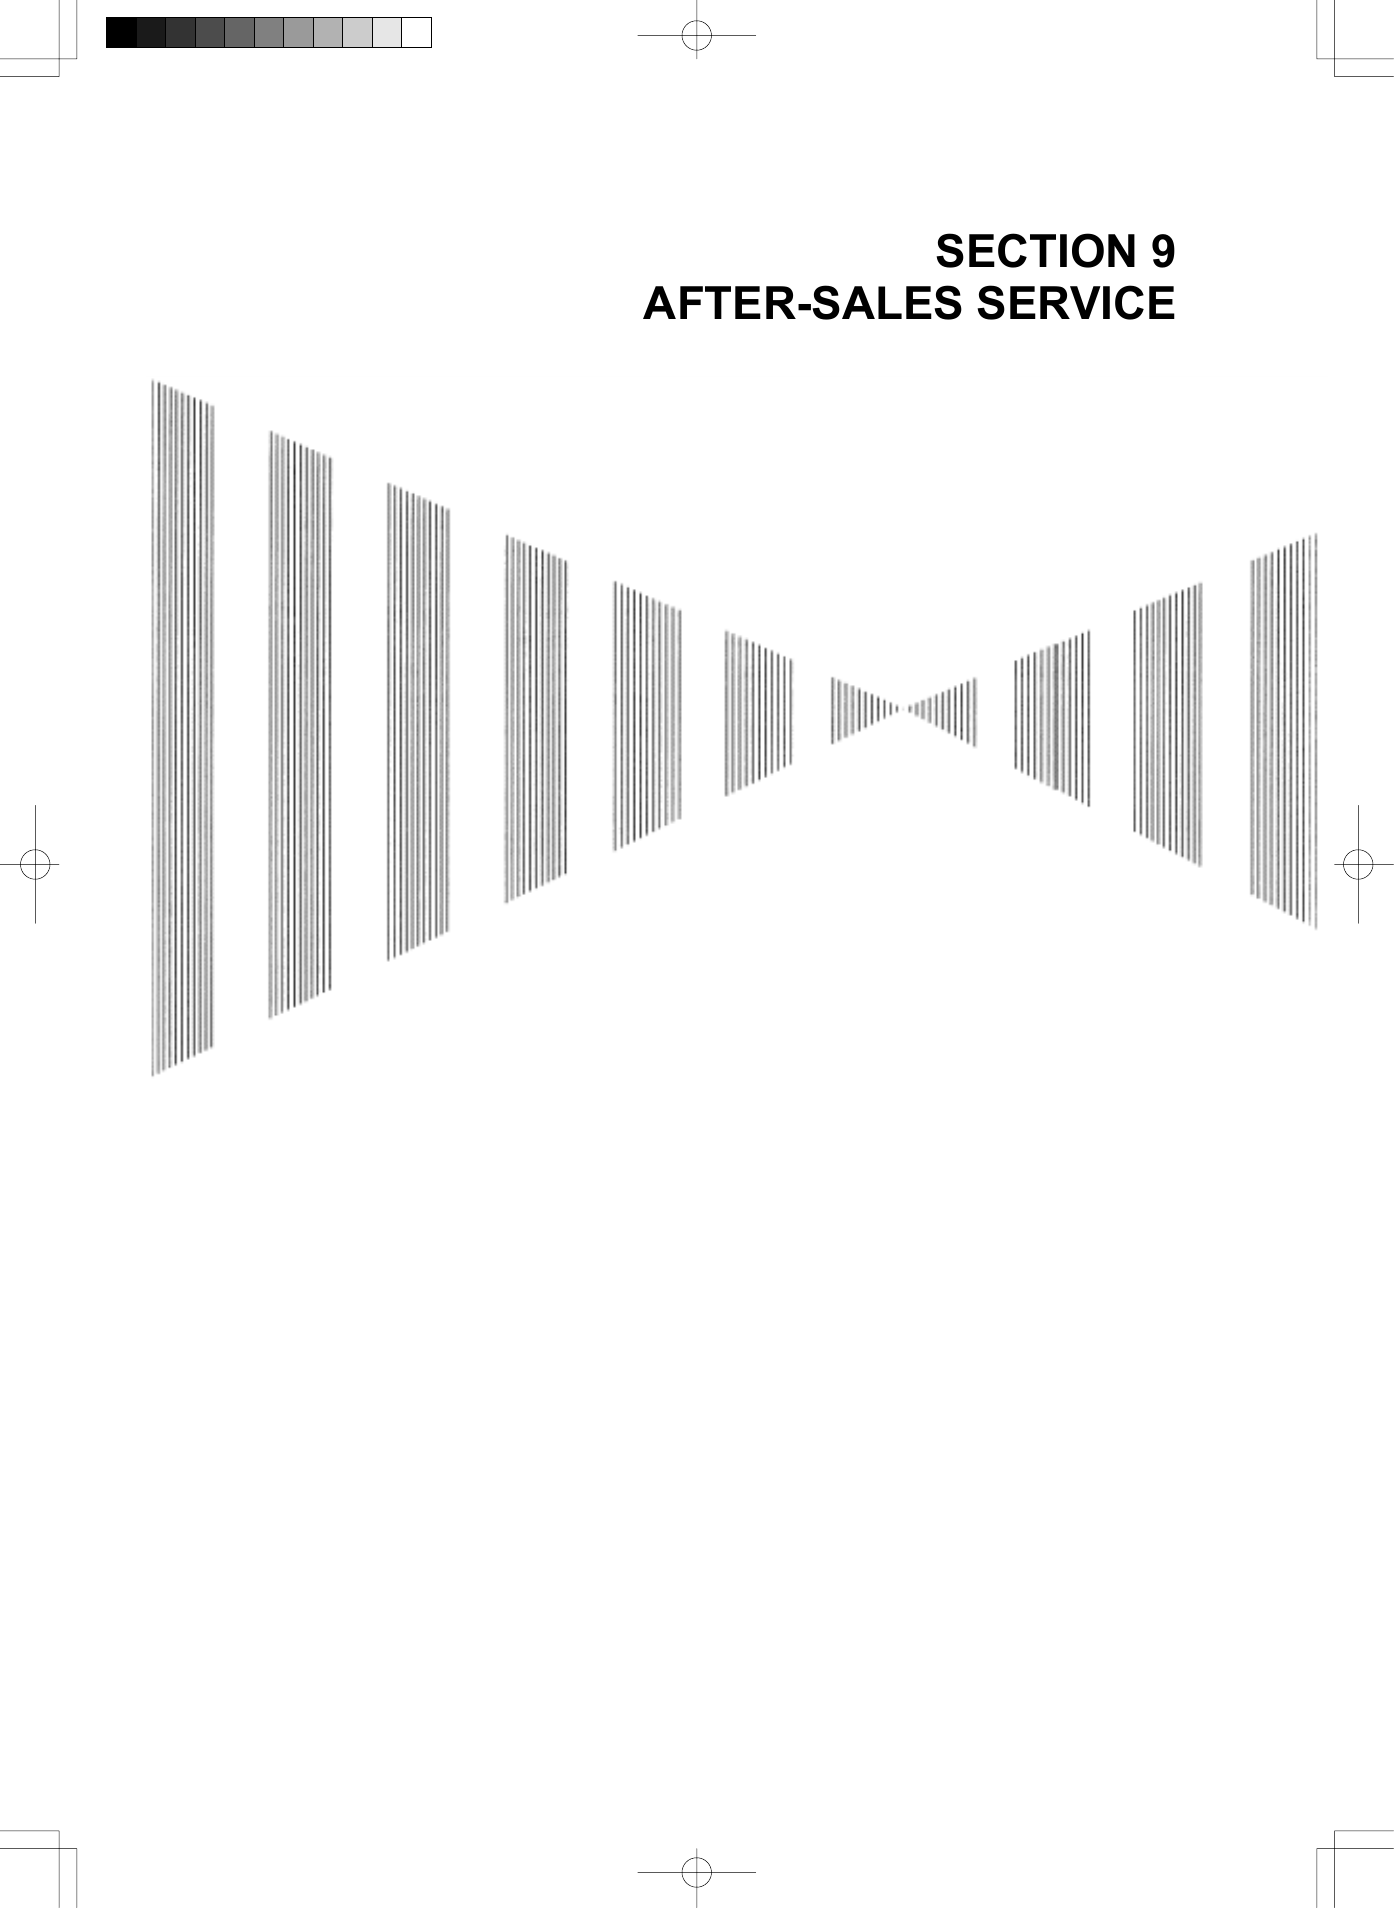   SECTION 9 AFTER-SALES SERVICE                                             